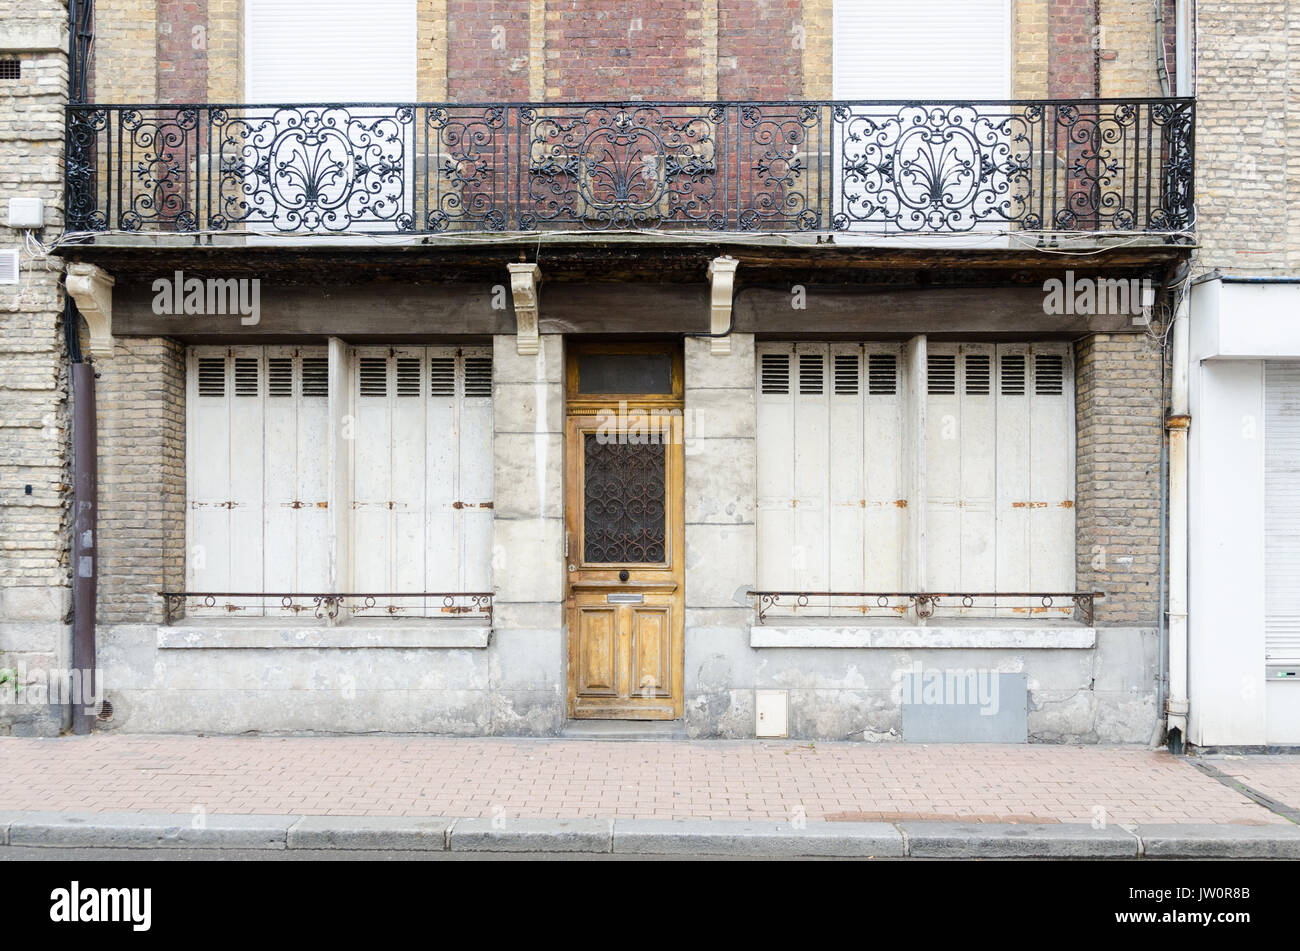 Old shop with shutters closed in French town in Pas de Calais, Northern France Stock Photo